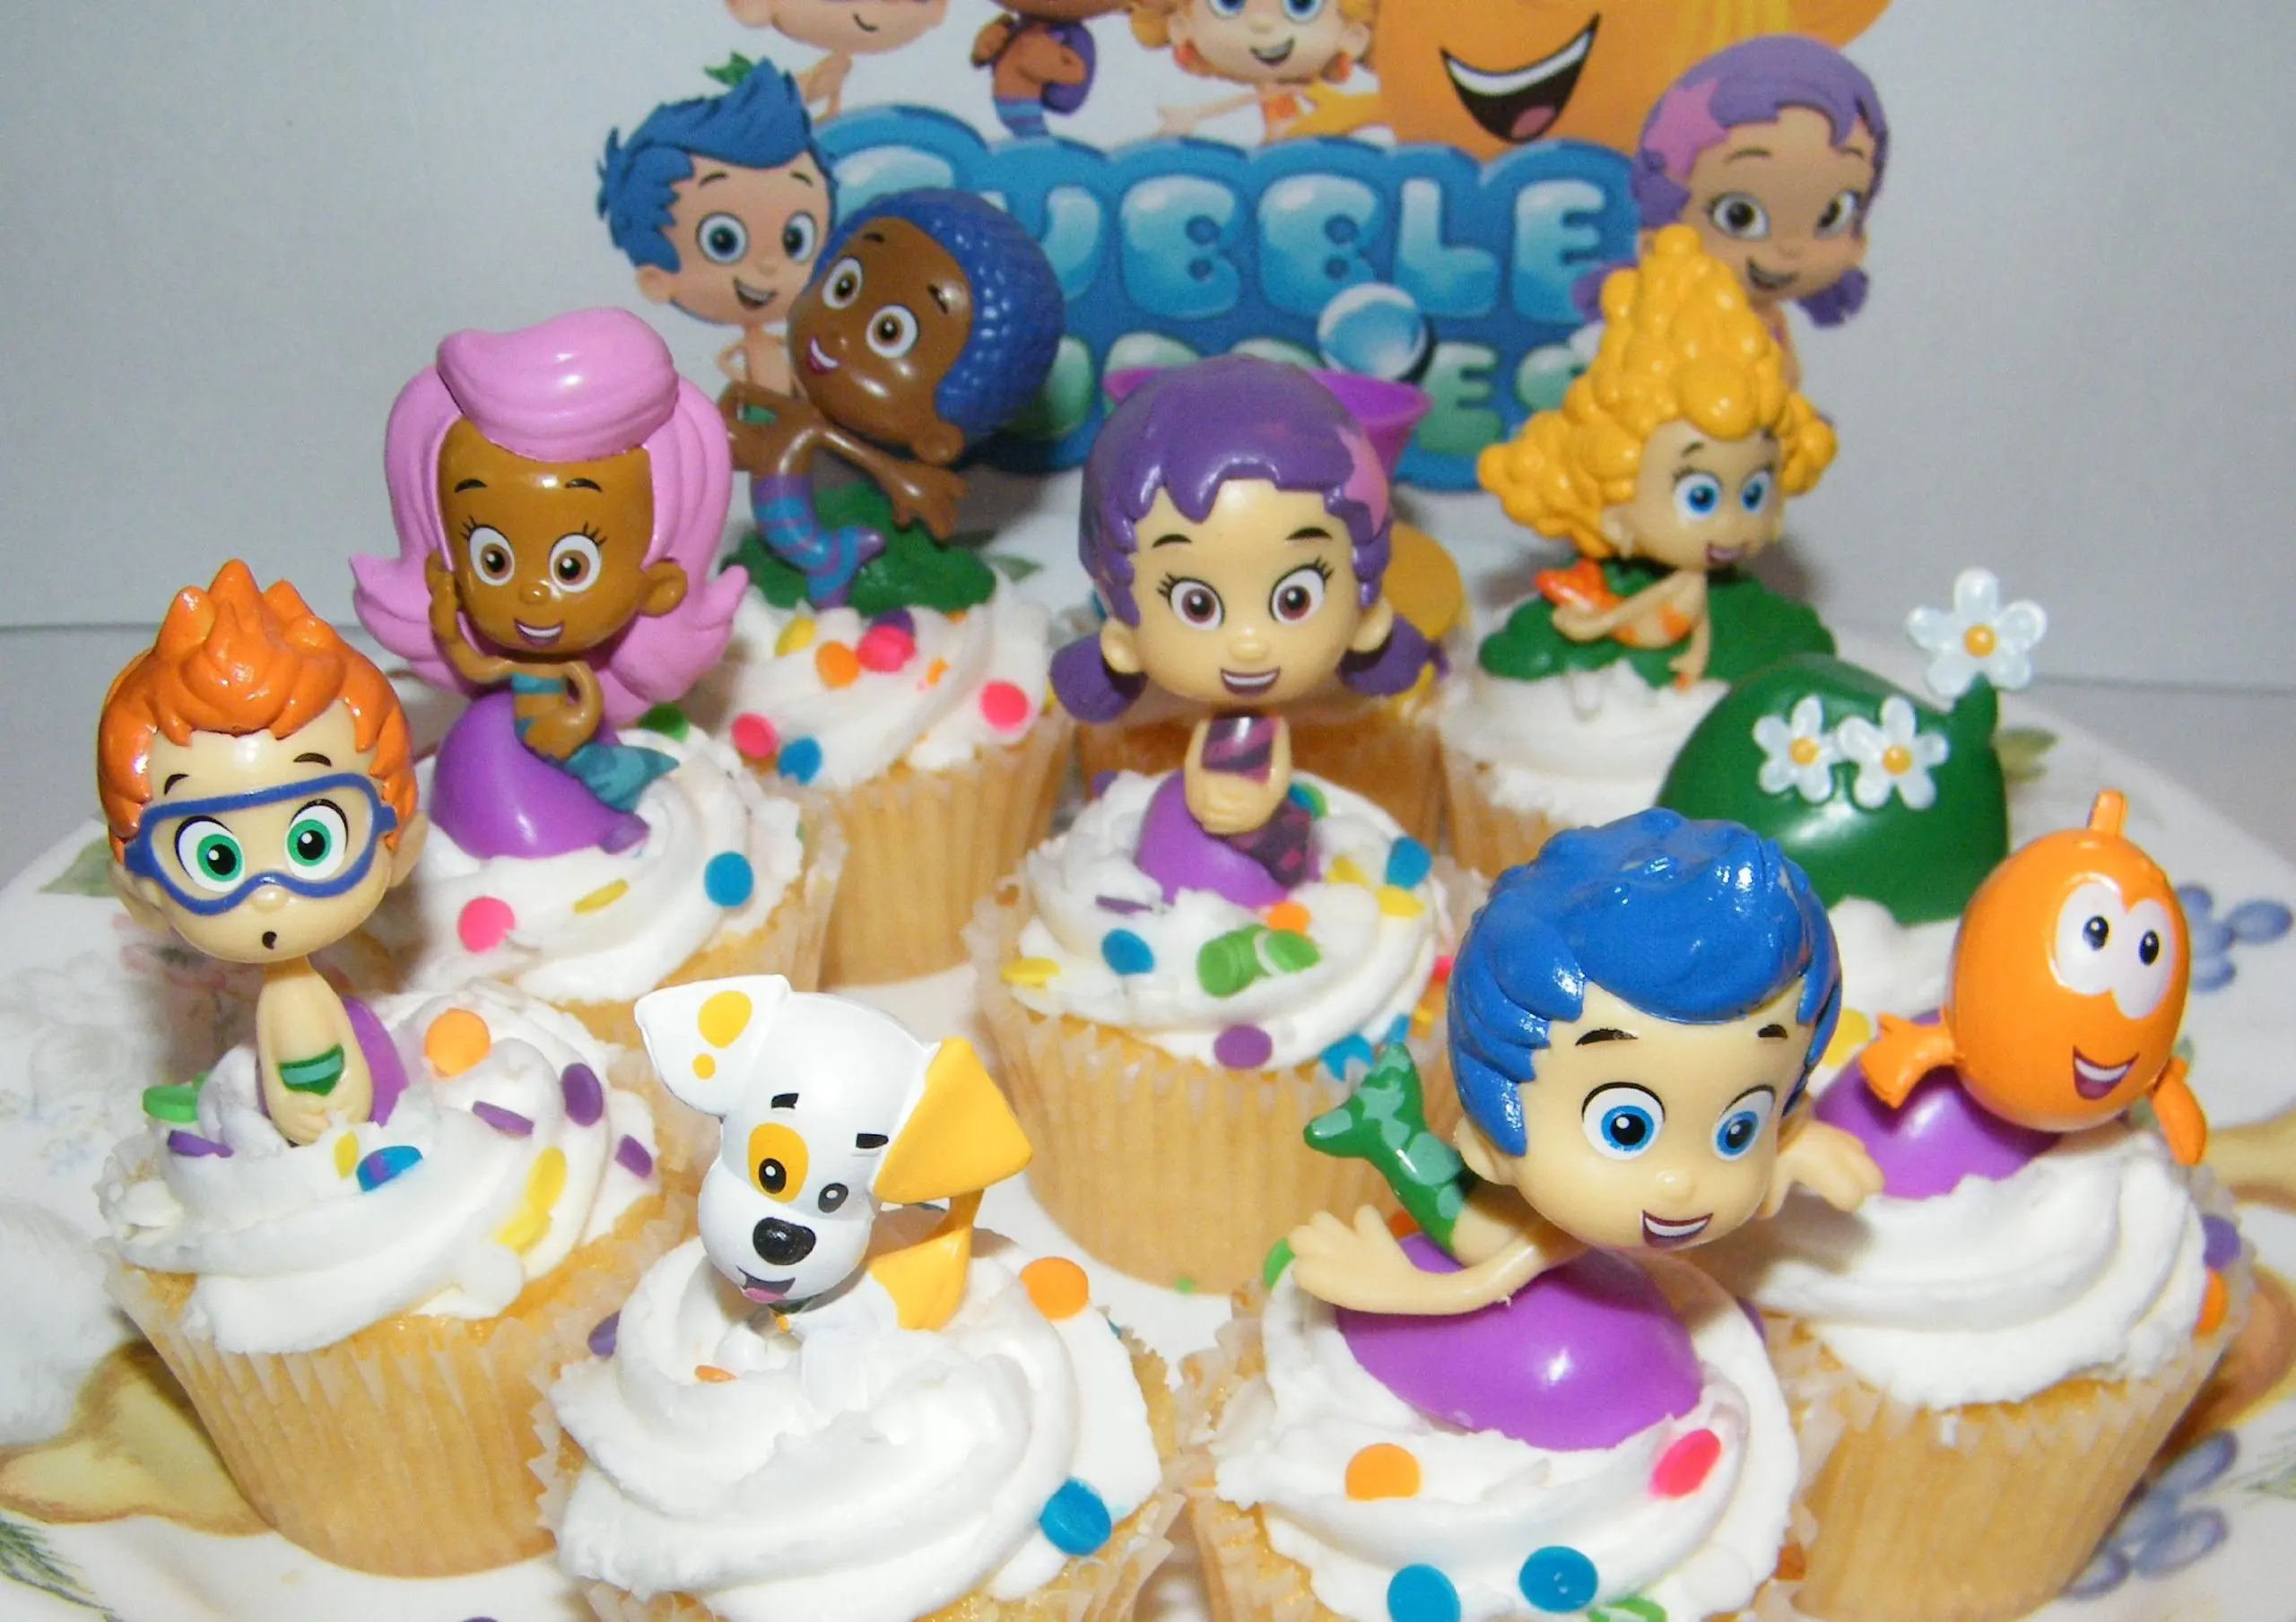 BUBBLE PUPPY Nickelodeon GUPPIES PET DOG PVC TOY Figure CUP CAKE TOPPER FIGURINE 